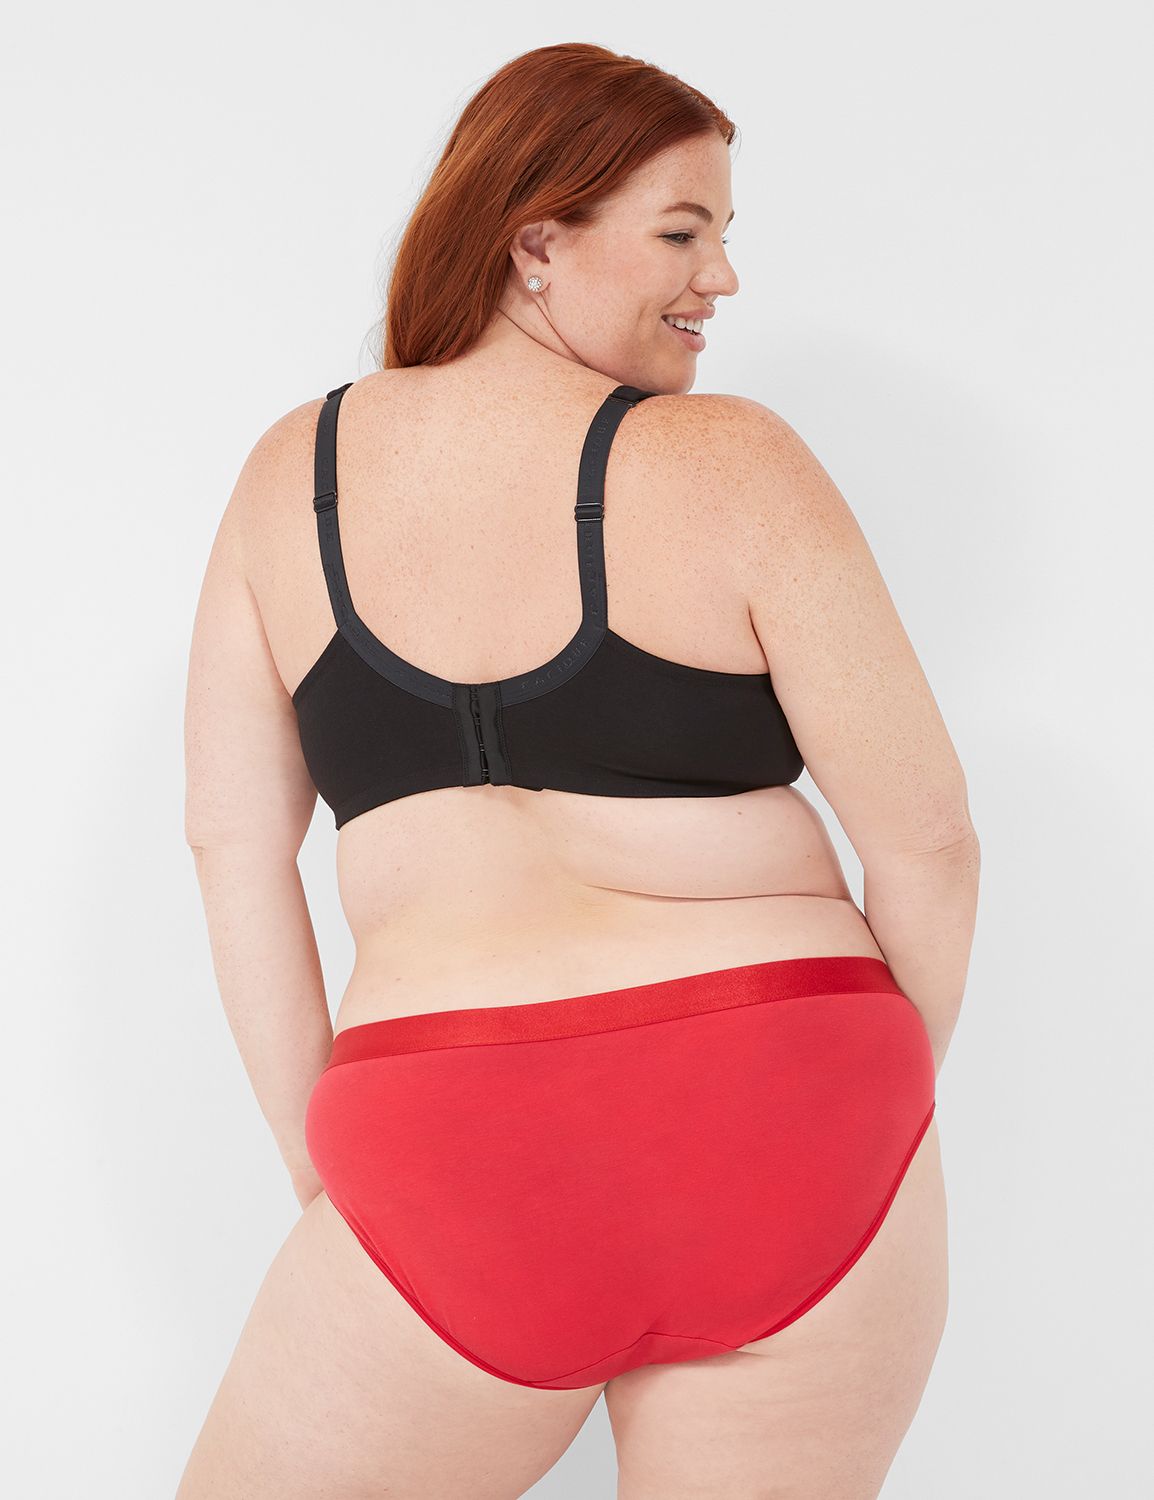 The Curvy Fashionista - This Cacique lingerie collection is red